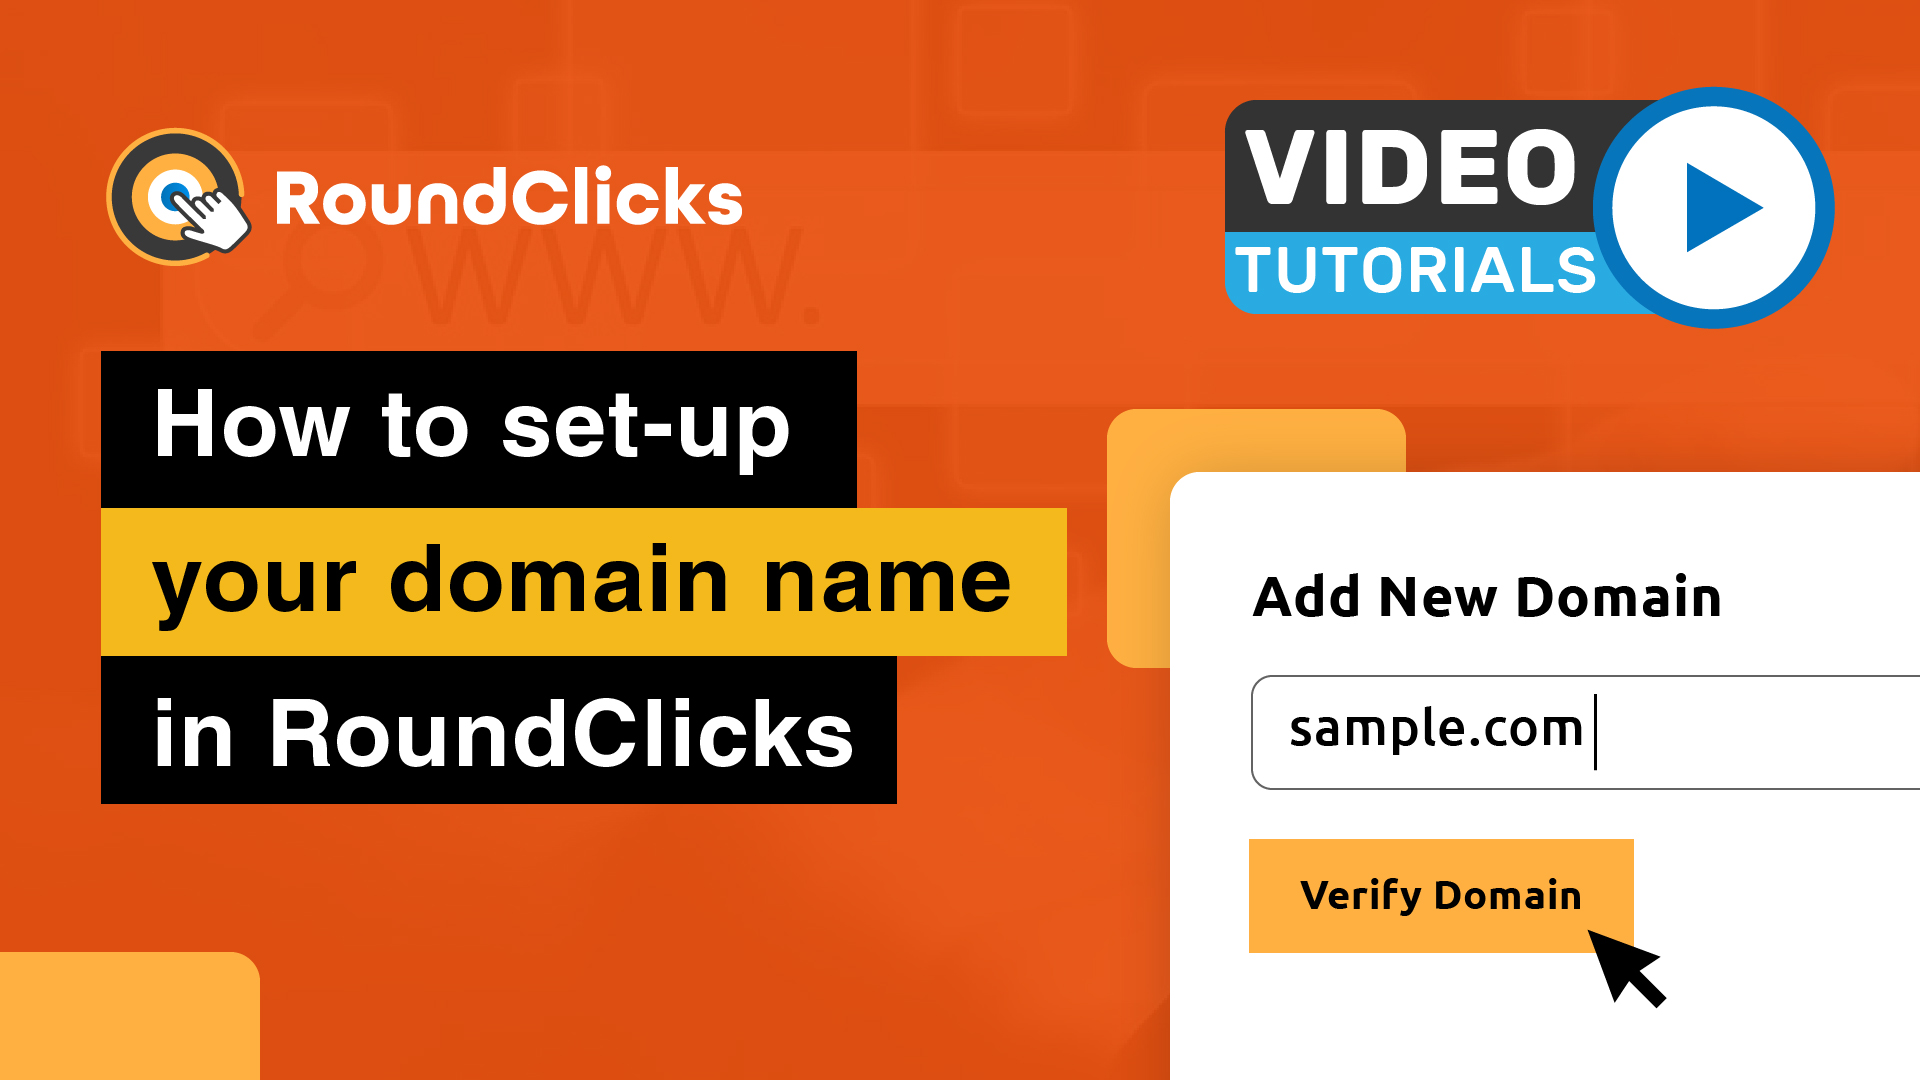 Set-up your domain name in RoundClicks